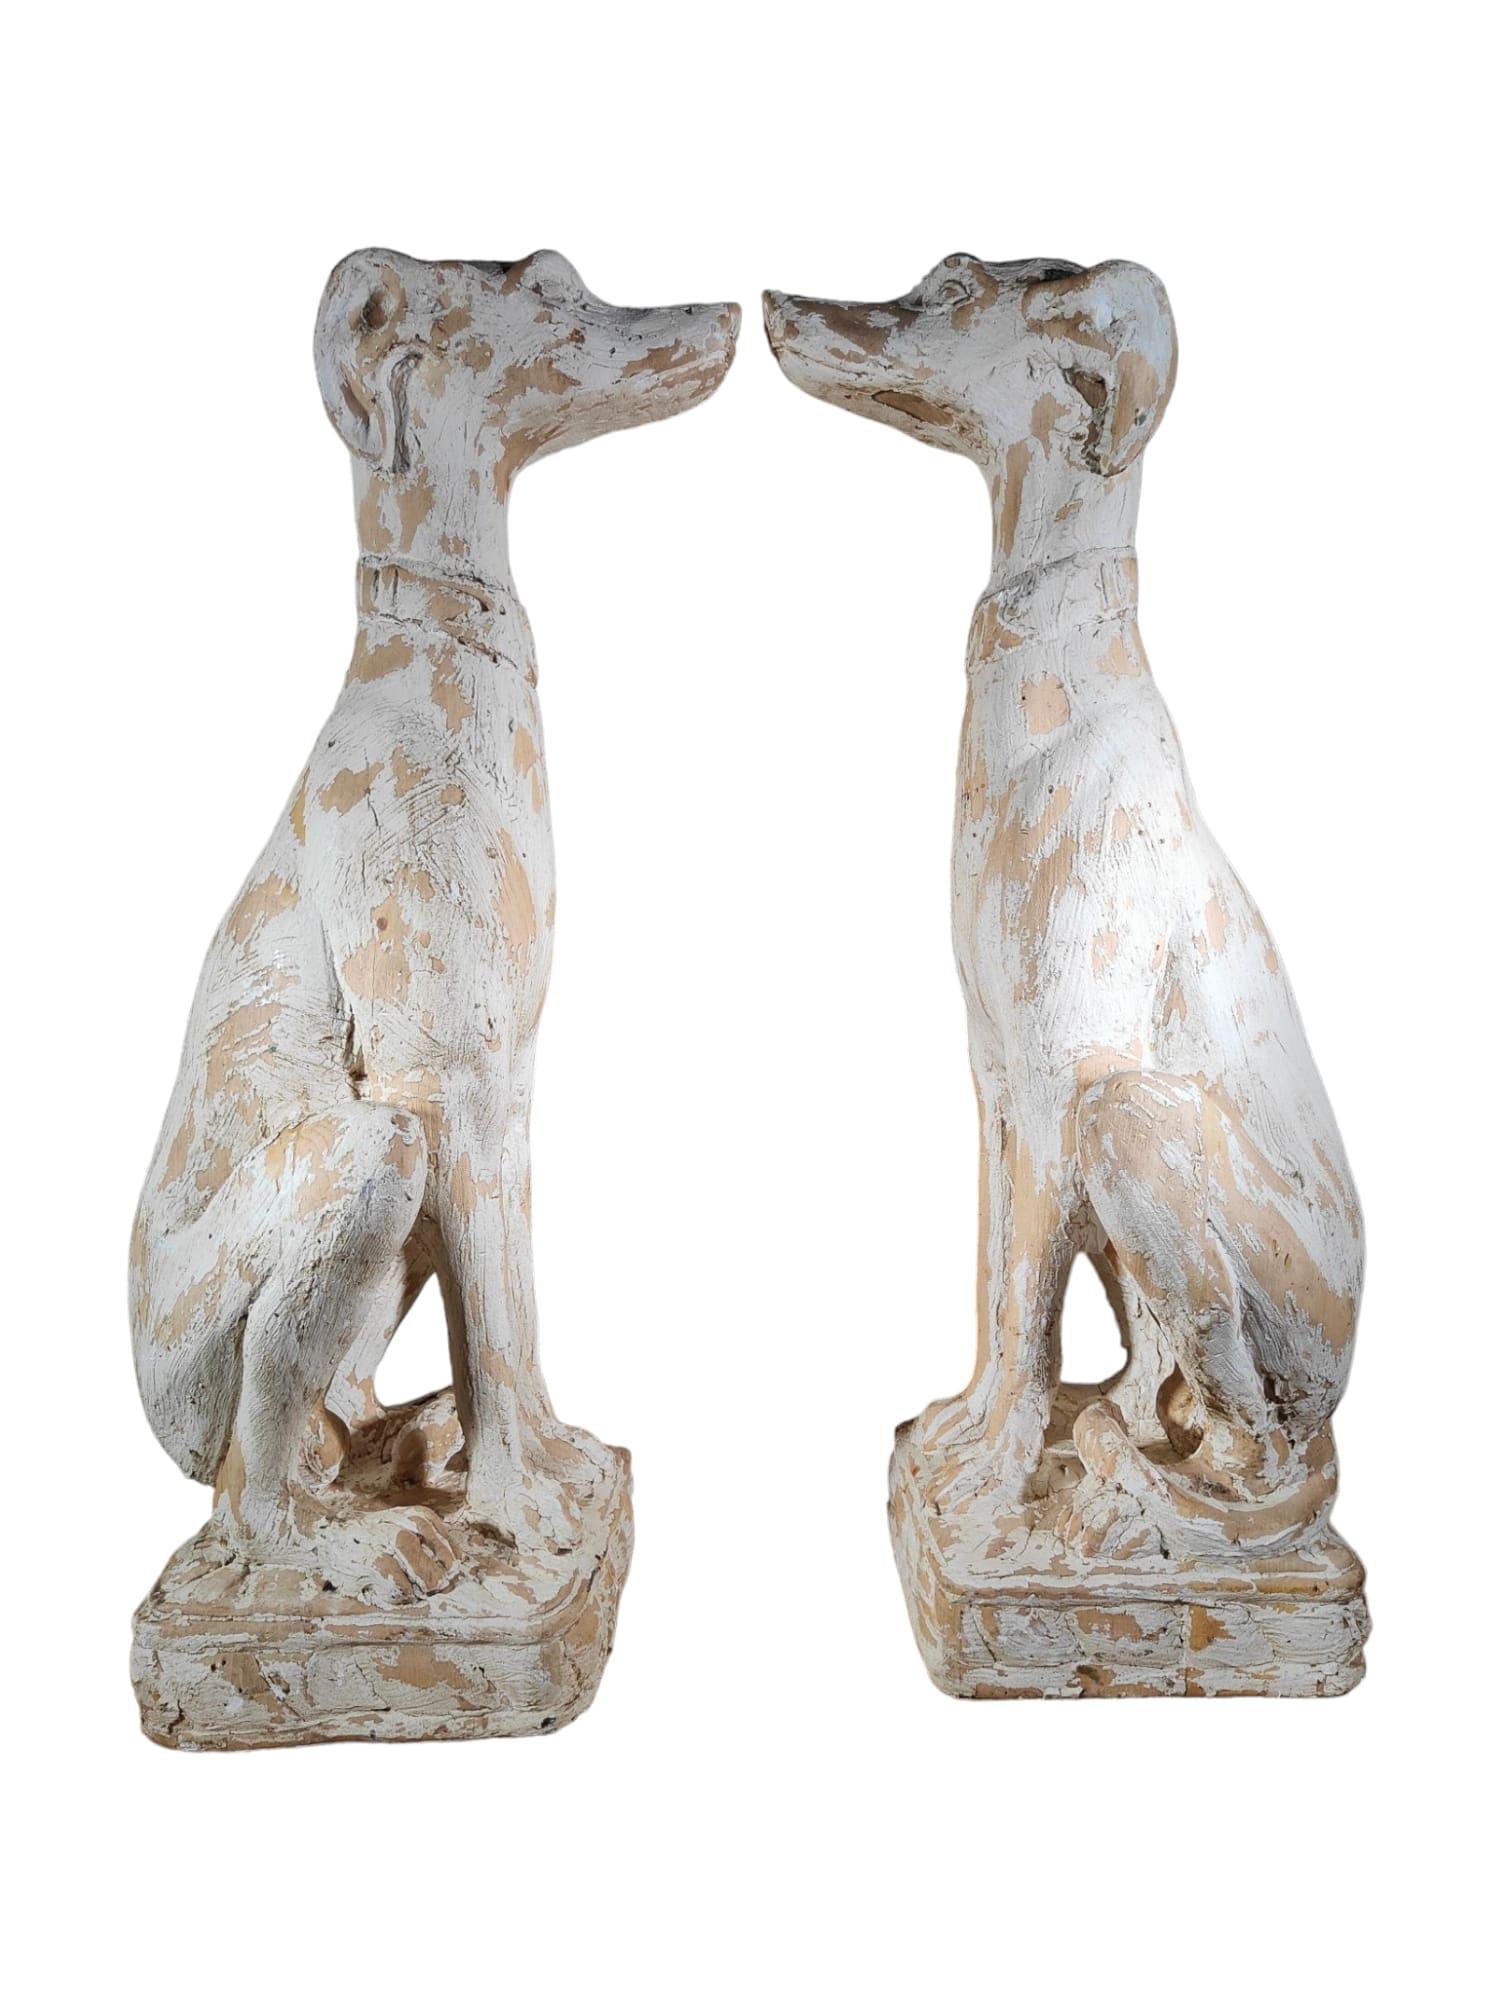 Charming Pair of Italian Greyhounds: Decorative Solid Wood Carved Statues 4